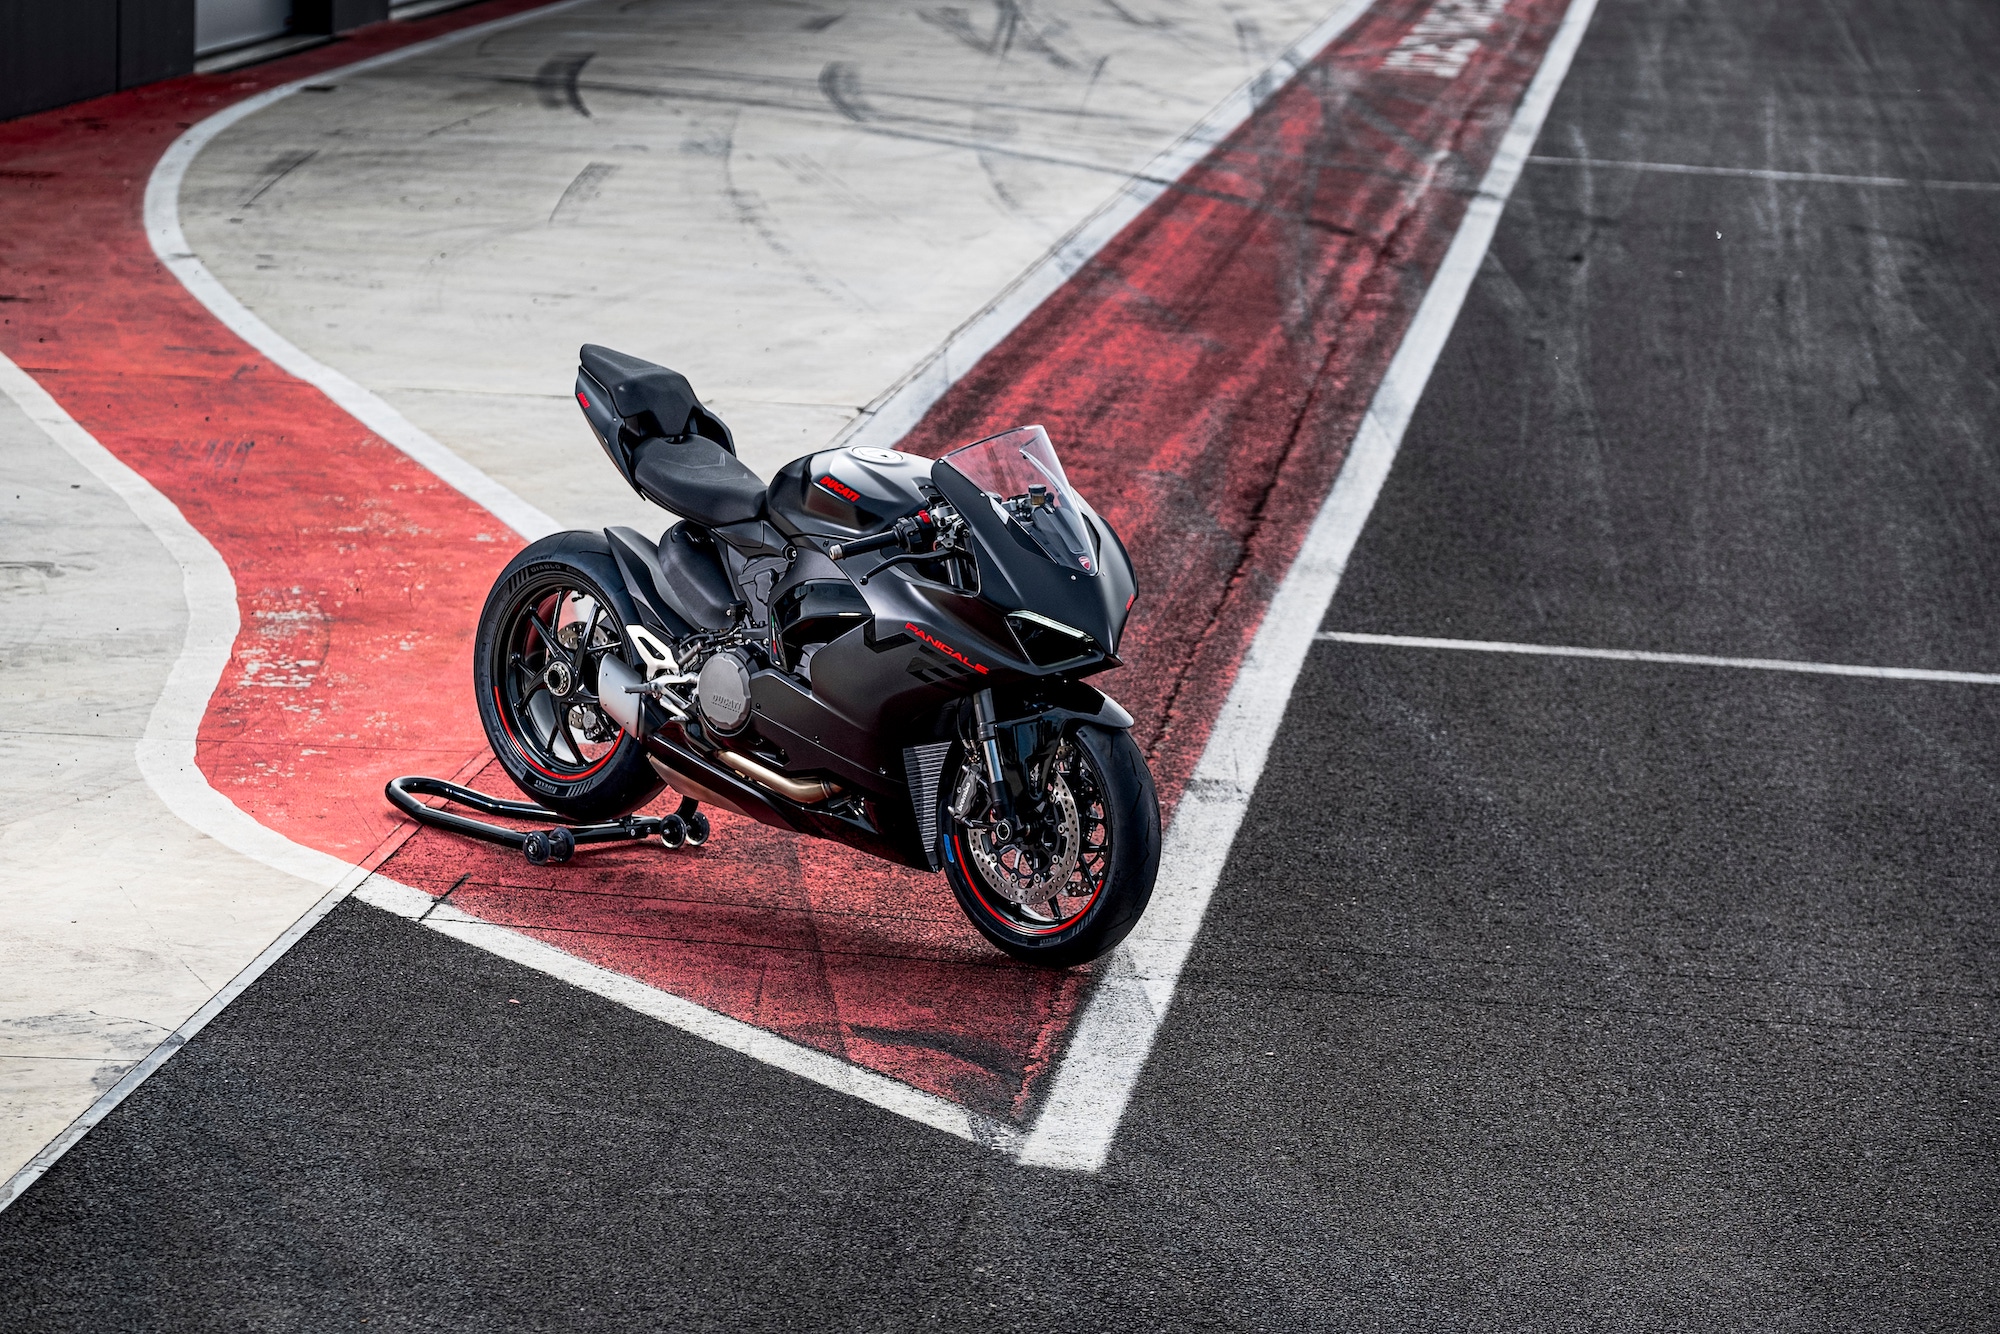 Ducati's blacked-out Panigale V2. Media sourced from Ducati.